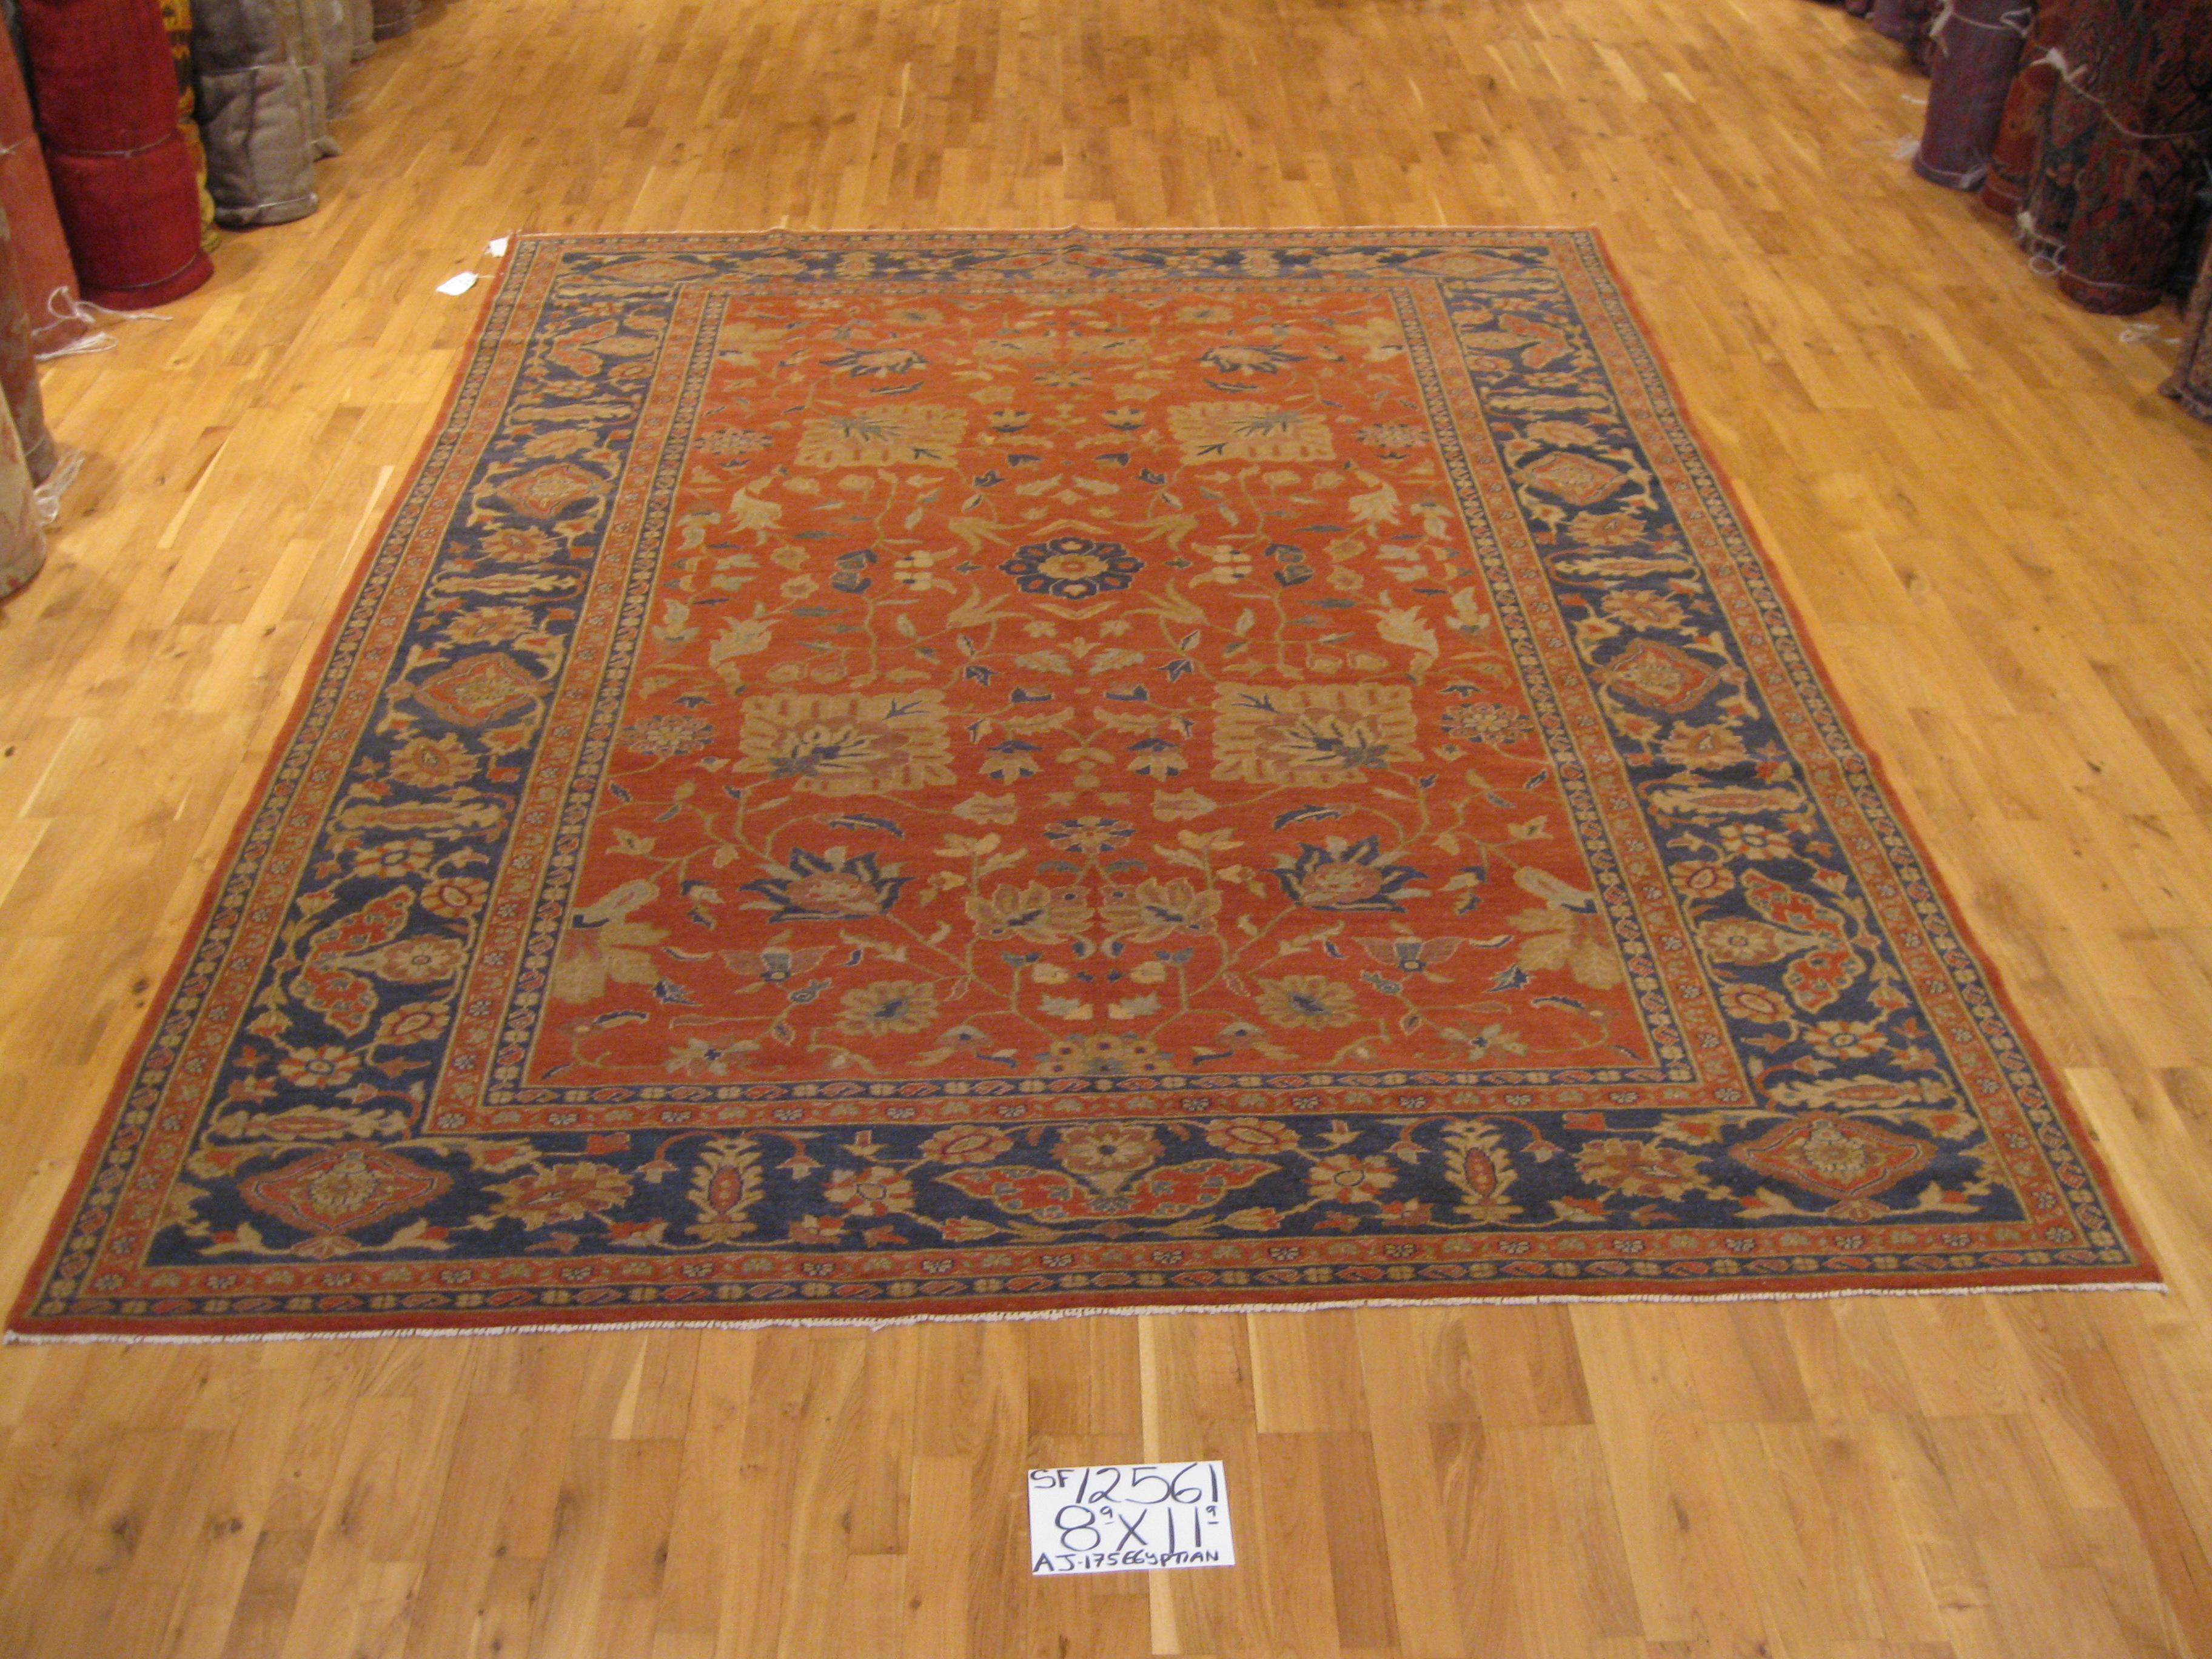 Although not as widely known as its Turkish and Persian counterparts, Egypt has a rug-making tradition that dates back centuries. This elegant traditional style rug with its bold blue and red colors and Persian styling dates from the 1920s and